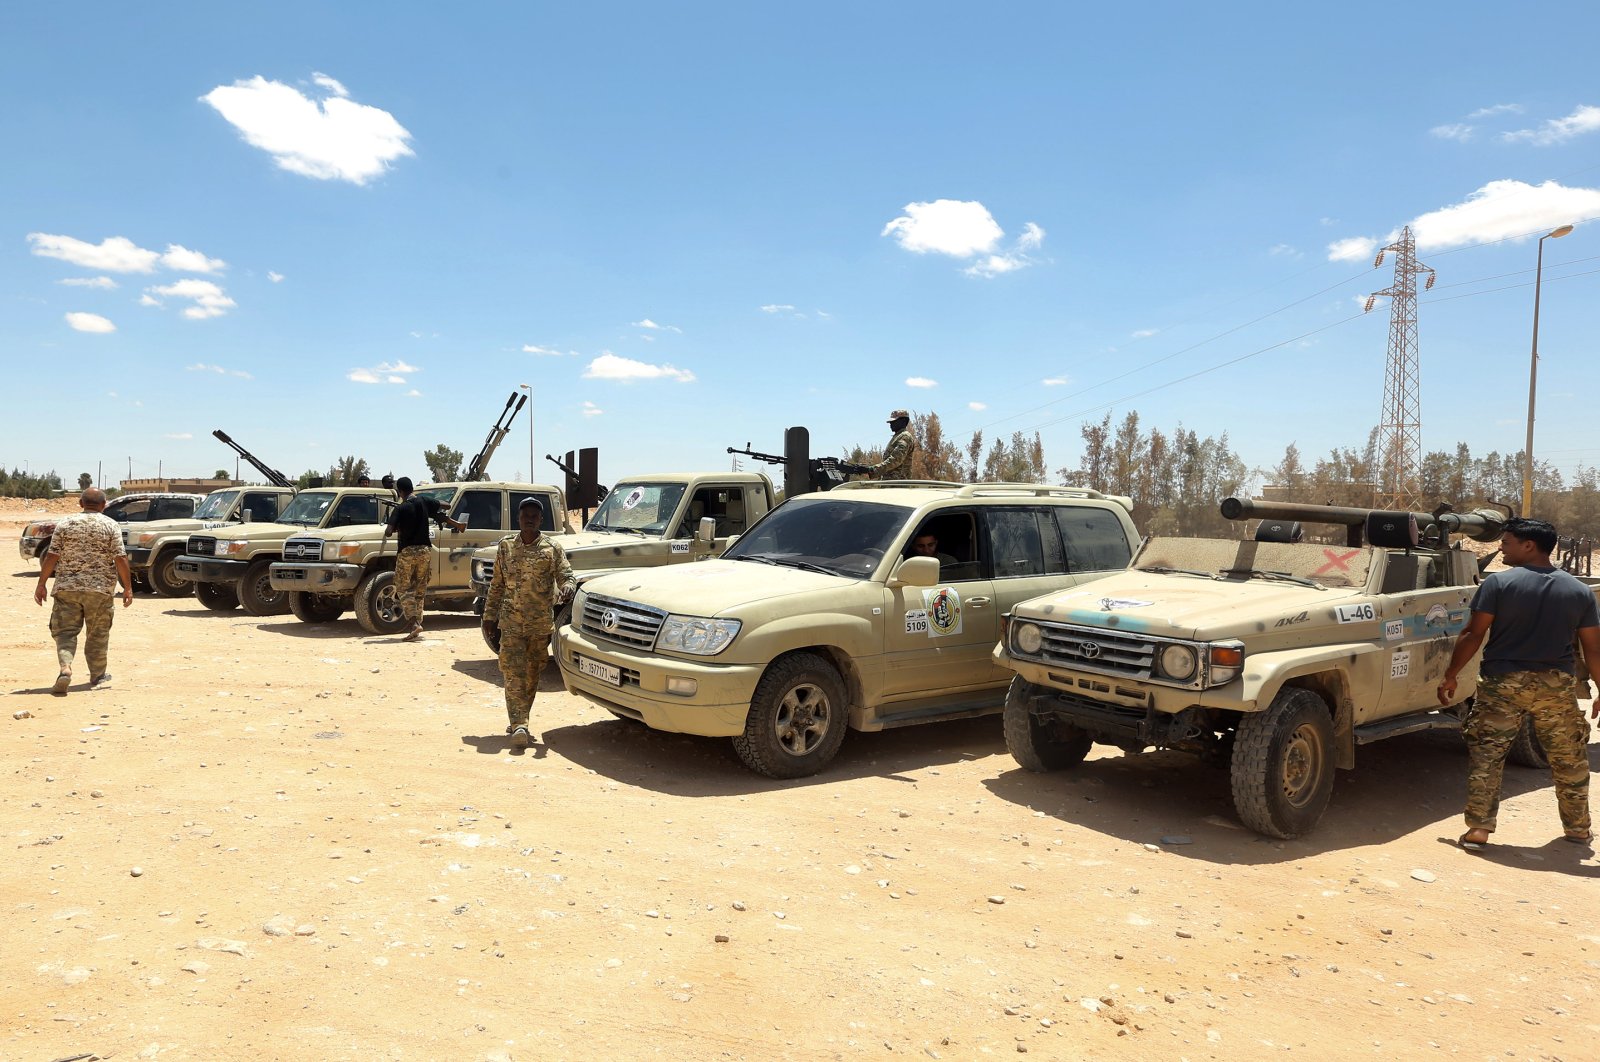 Forces loyal to the U.N.-recognized Libyan Government of National Accord (GNA) secure the area of Abu Qurain, halfway between the capital Tripoli and Libya's second-largest city Benghazi, against forces loyal to putschist Gen. Khalifa Haftar, July 20, 2020. (AFP Photo)